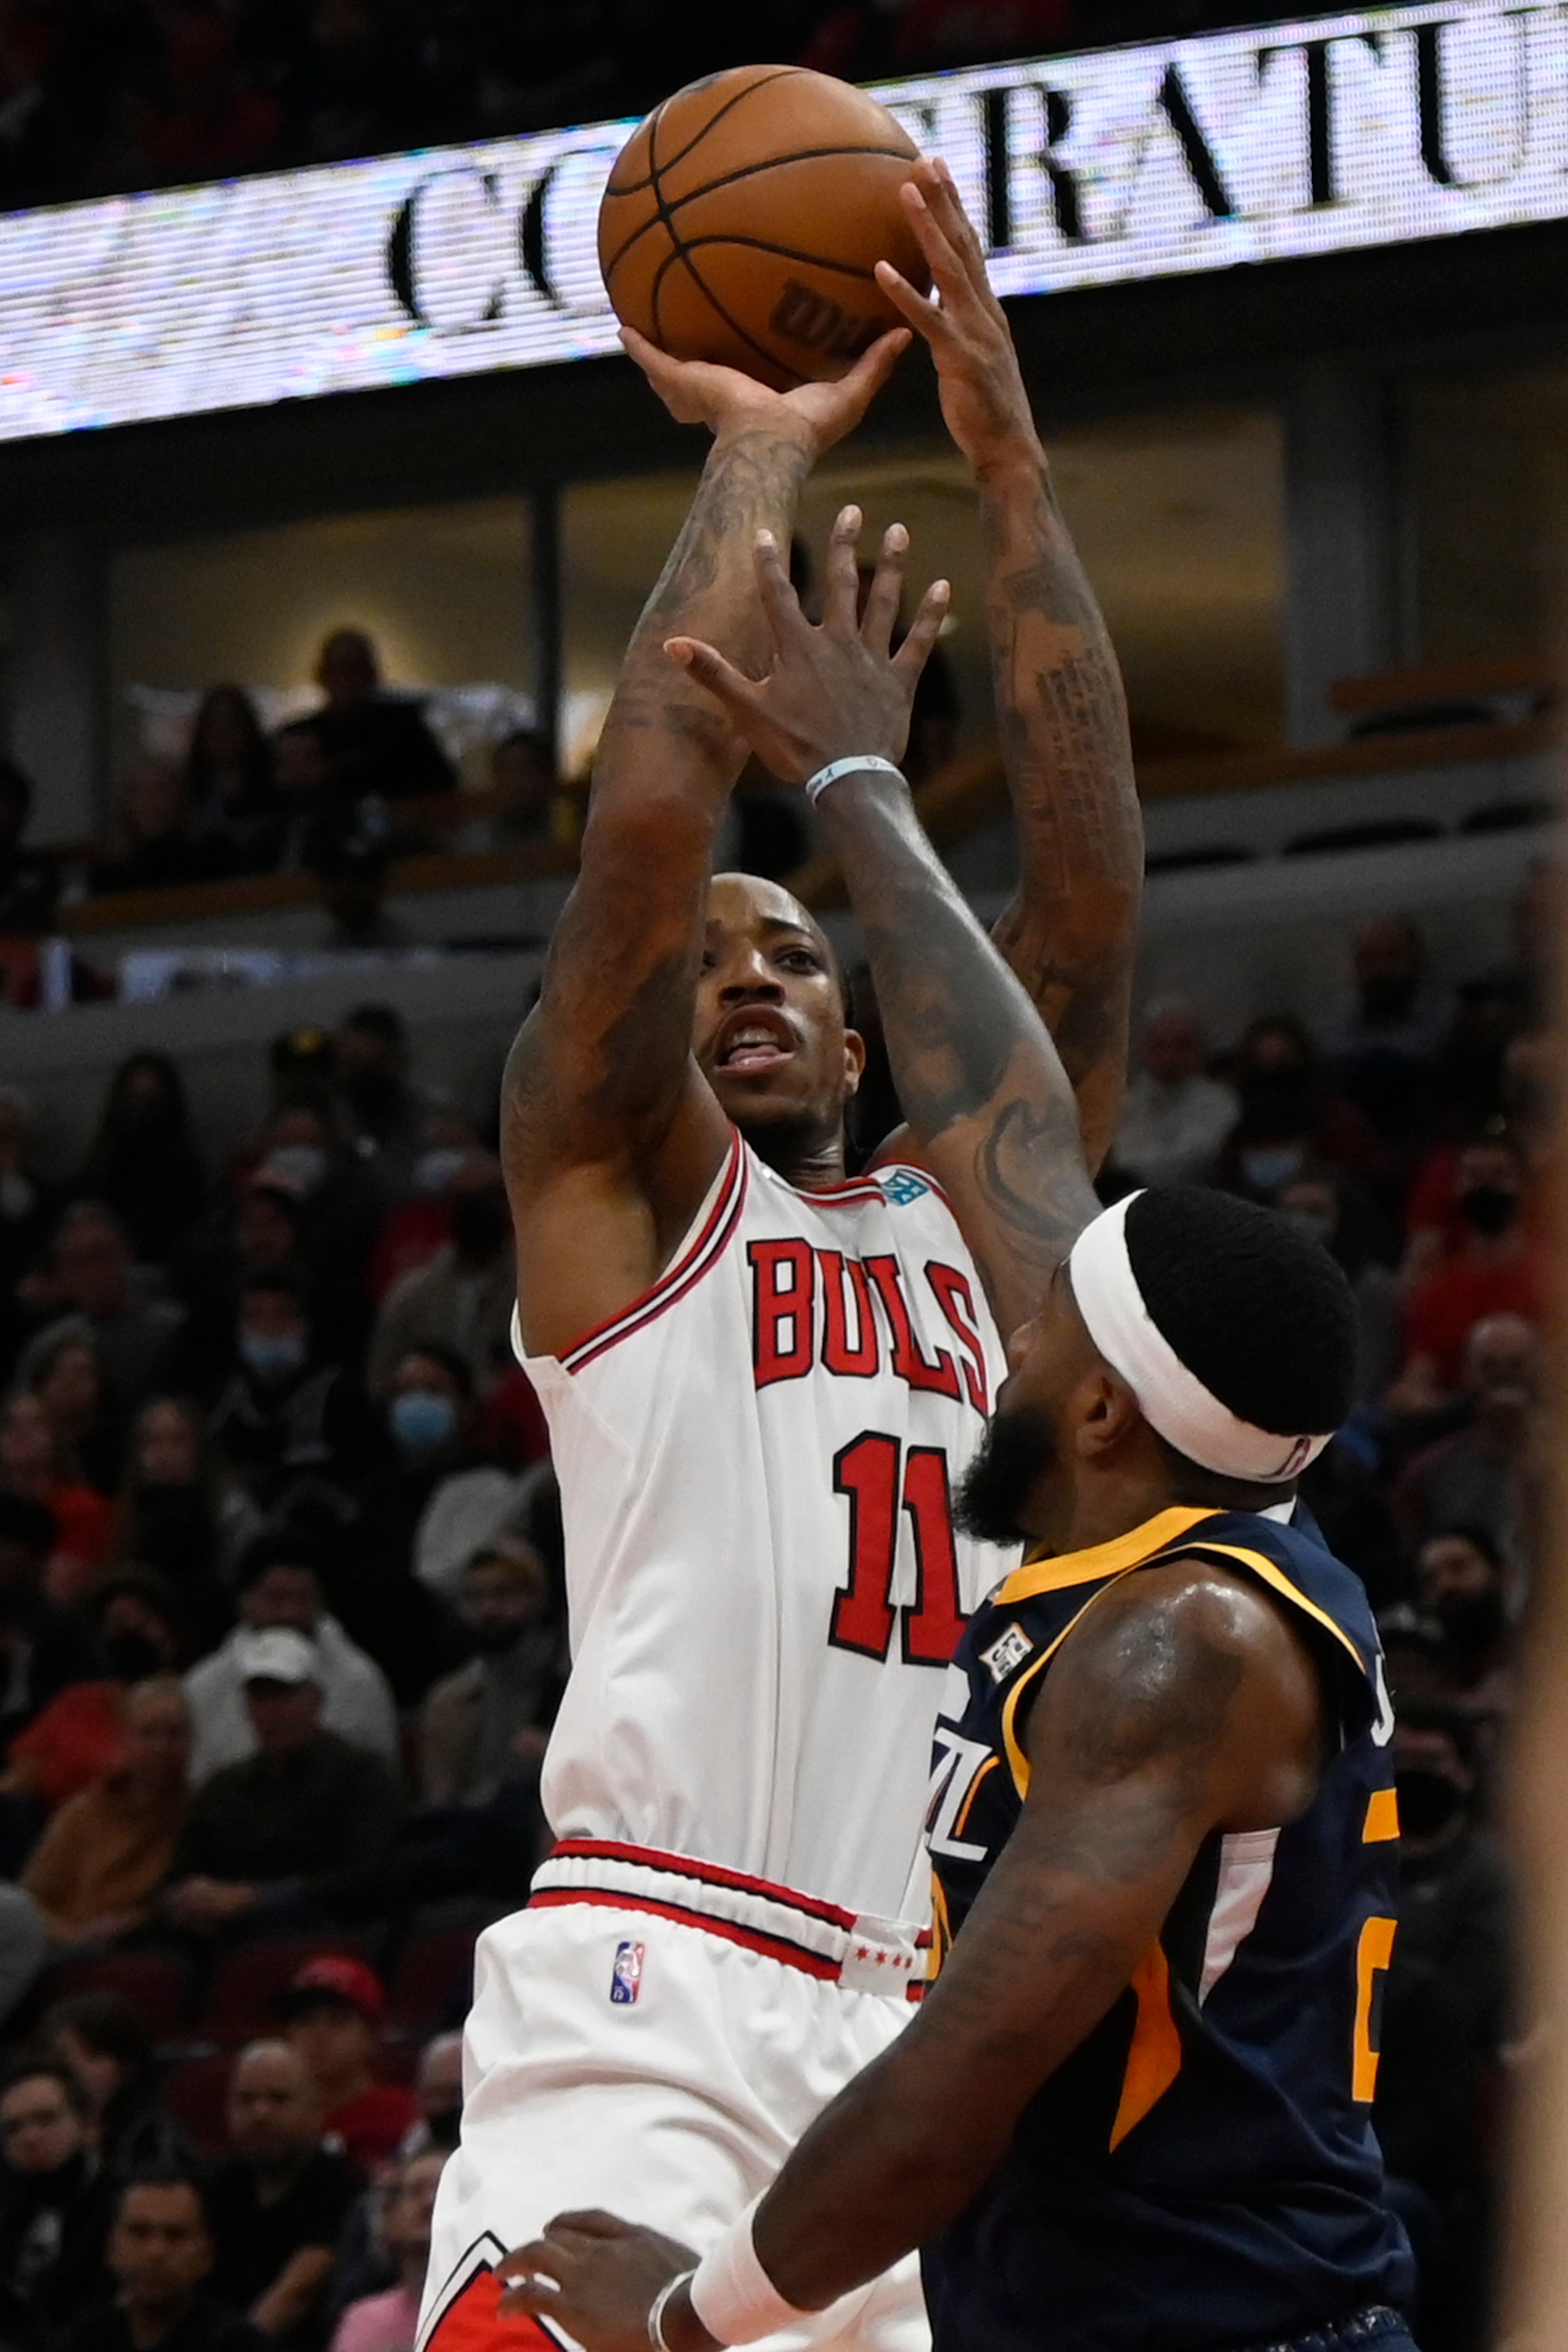 Chicago Bulls' DeMar DeRozan Is 1 Of The Just 10 Players In The